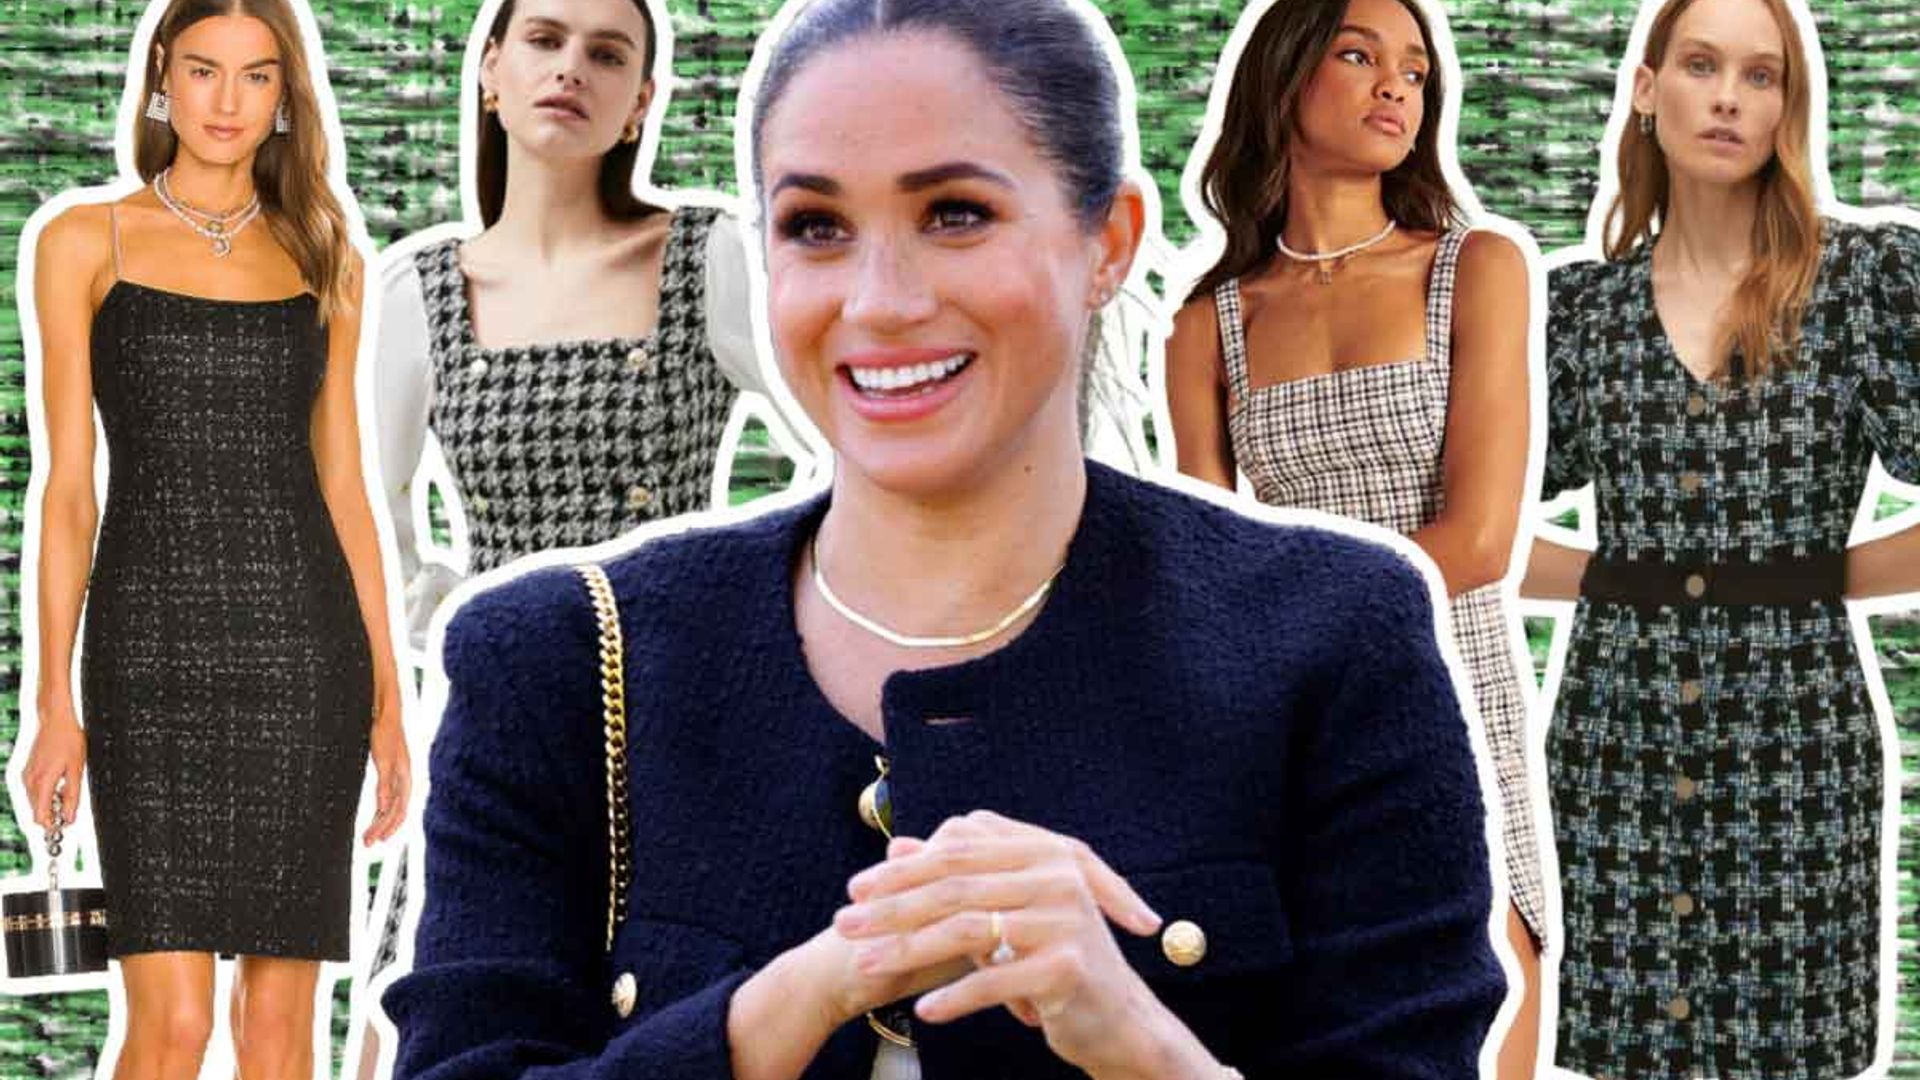 Meghan Markle's tweed Chanel dress was fashion goals – here are 11